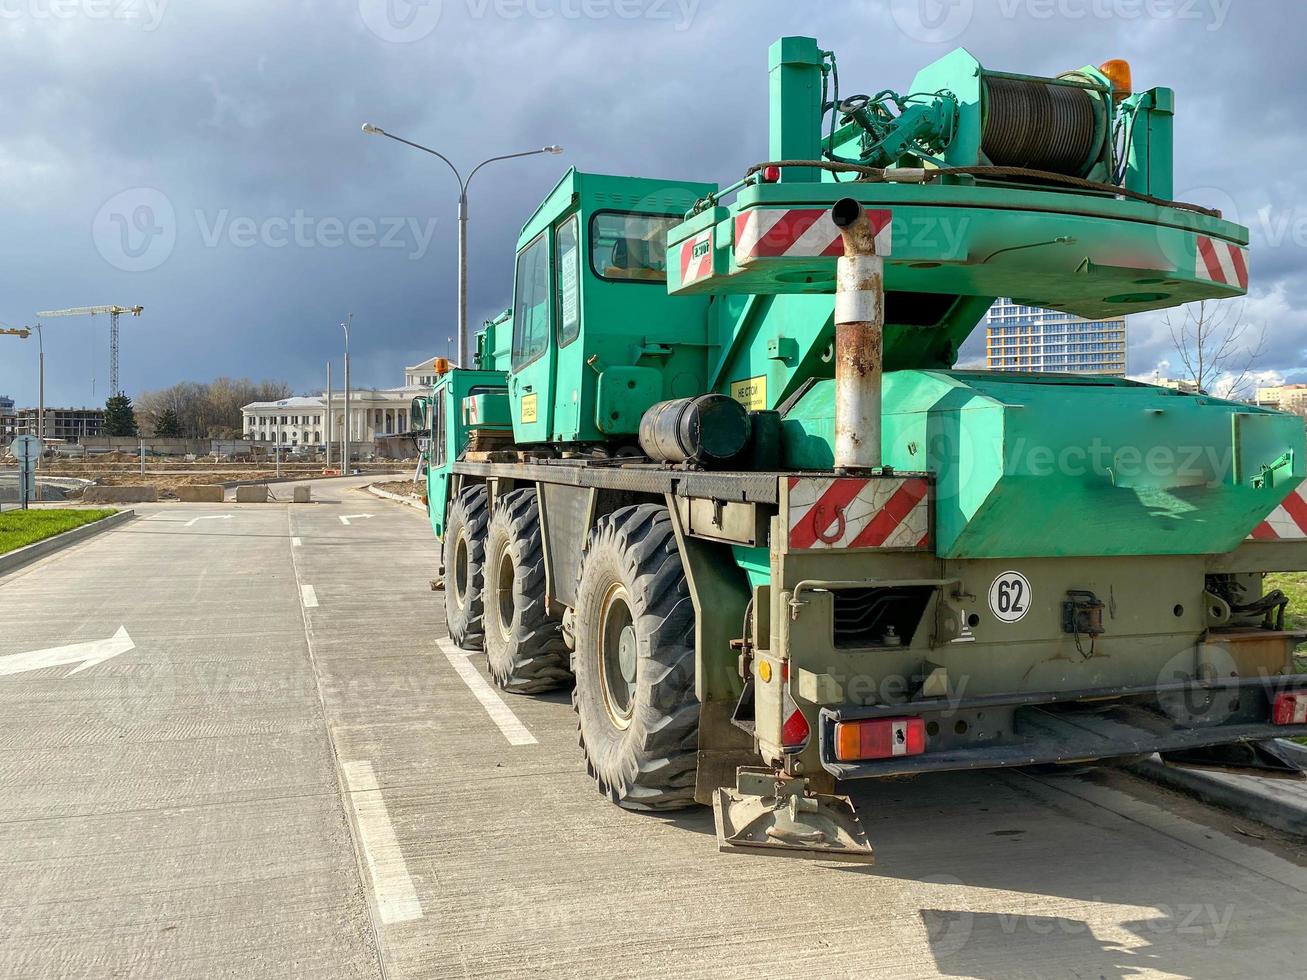 Large powerful new industrial green construction crane used in the construction of new areas of the city. Special construction equipment photo